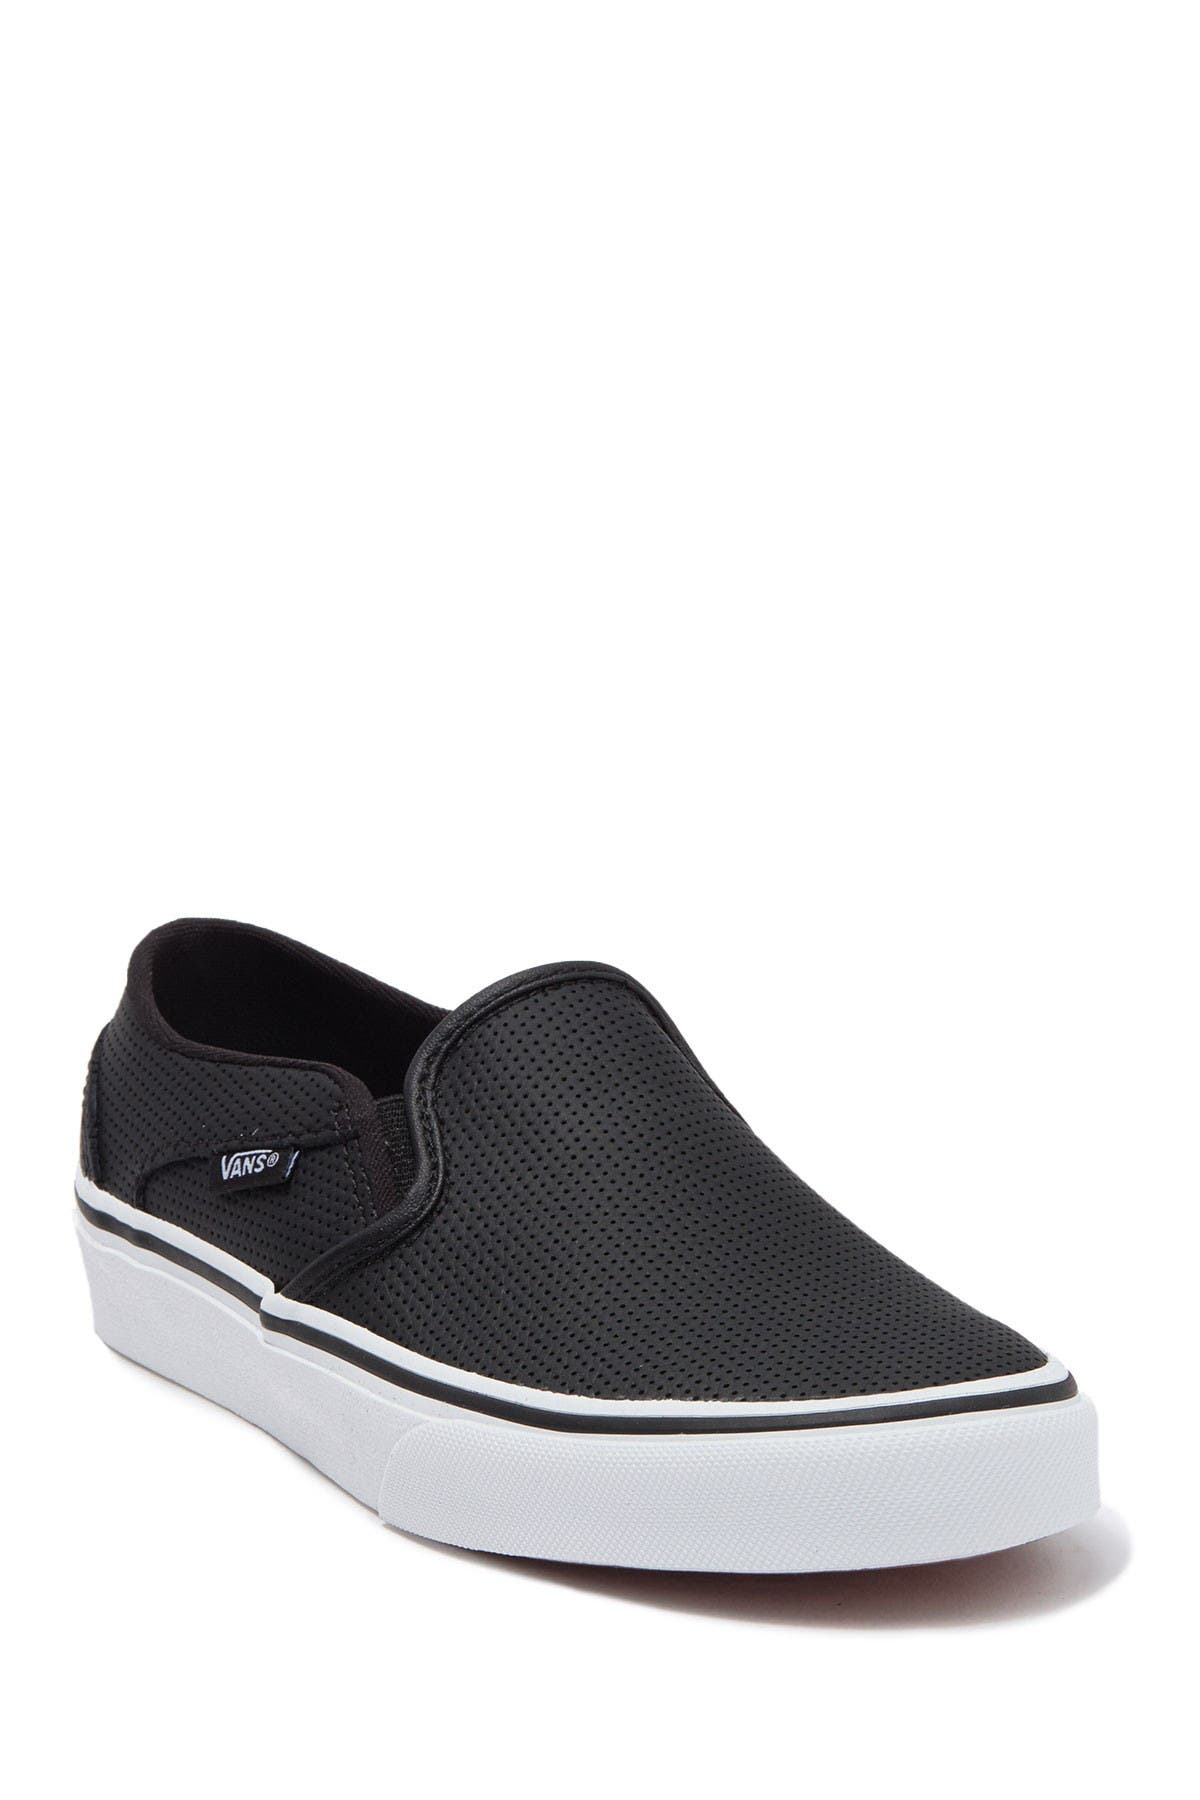 asher perforated vans